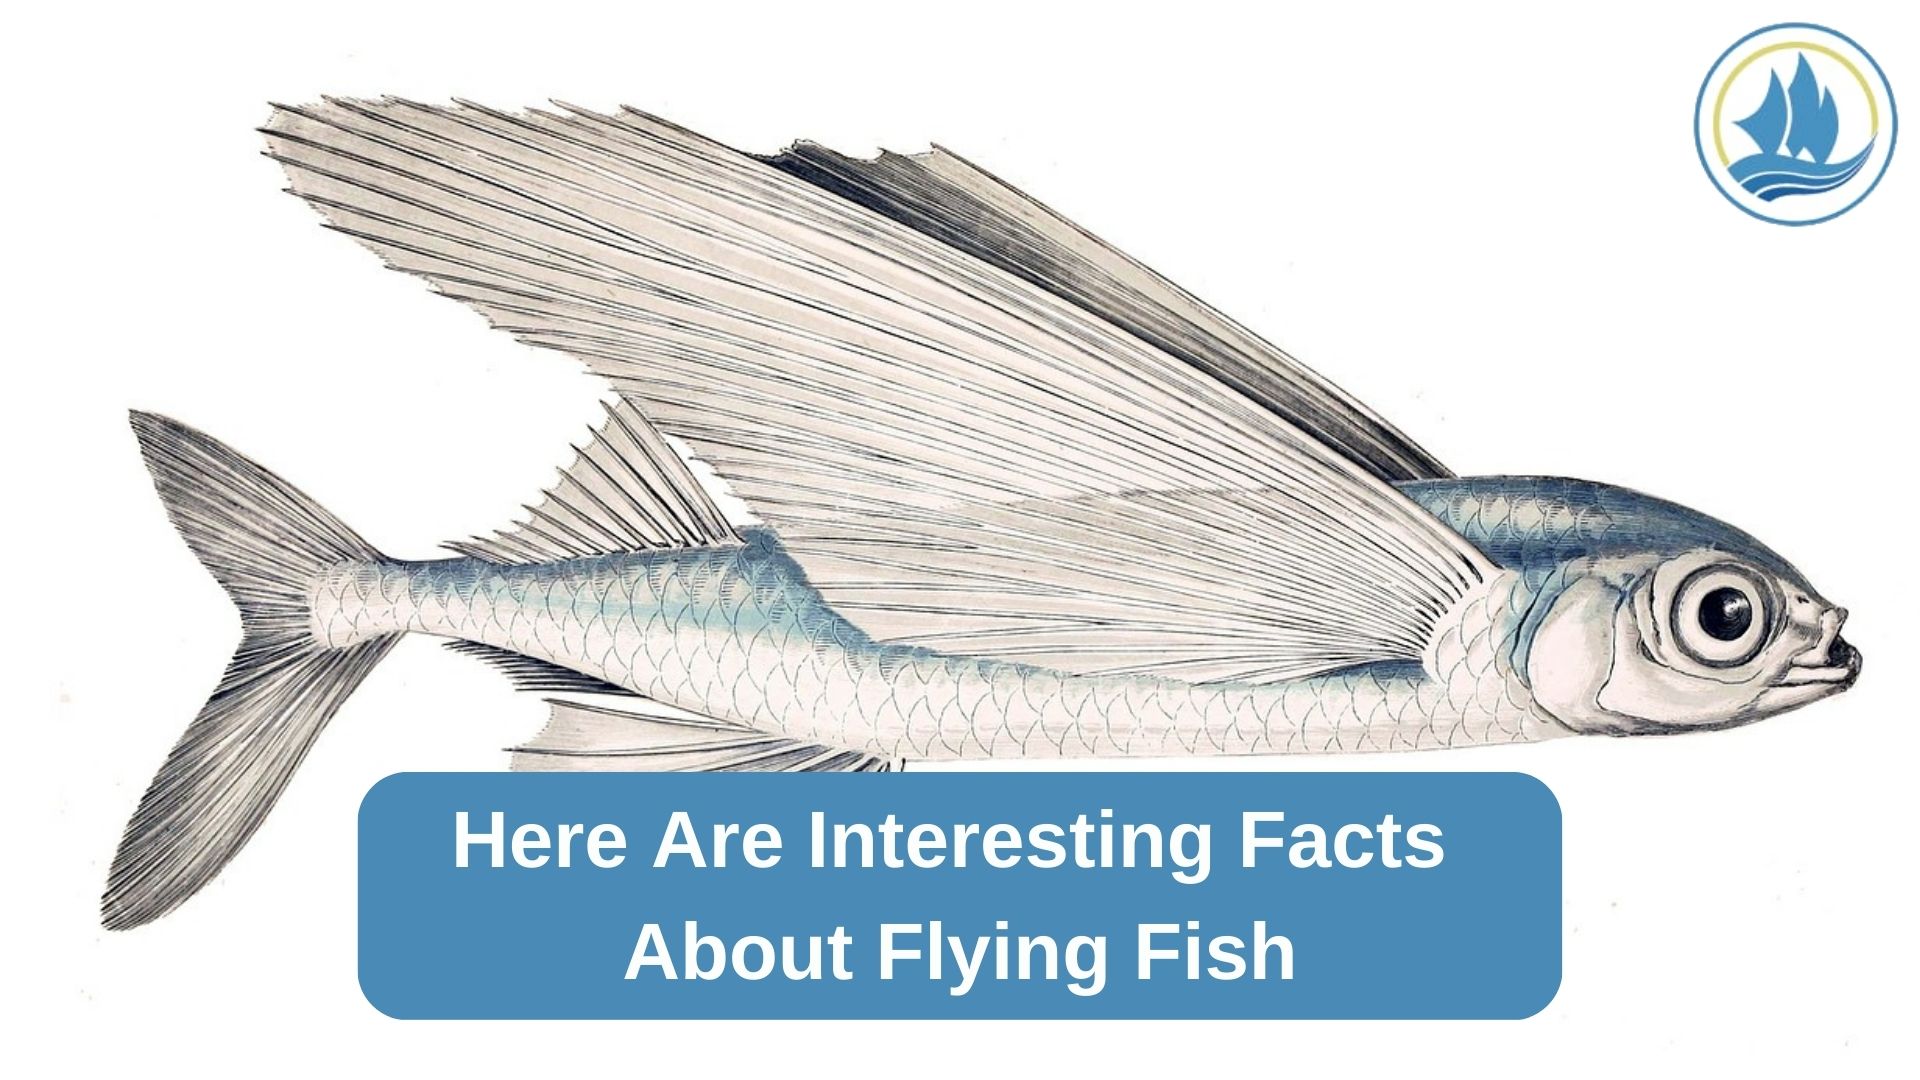 Here Are Interesting Facts About Flying Fish